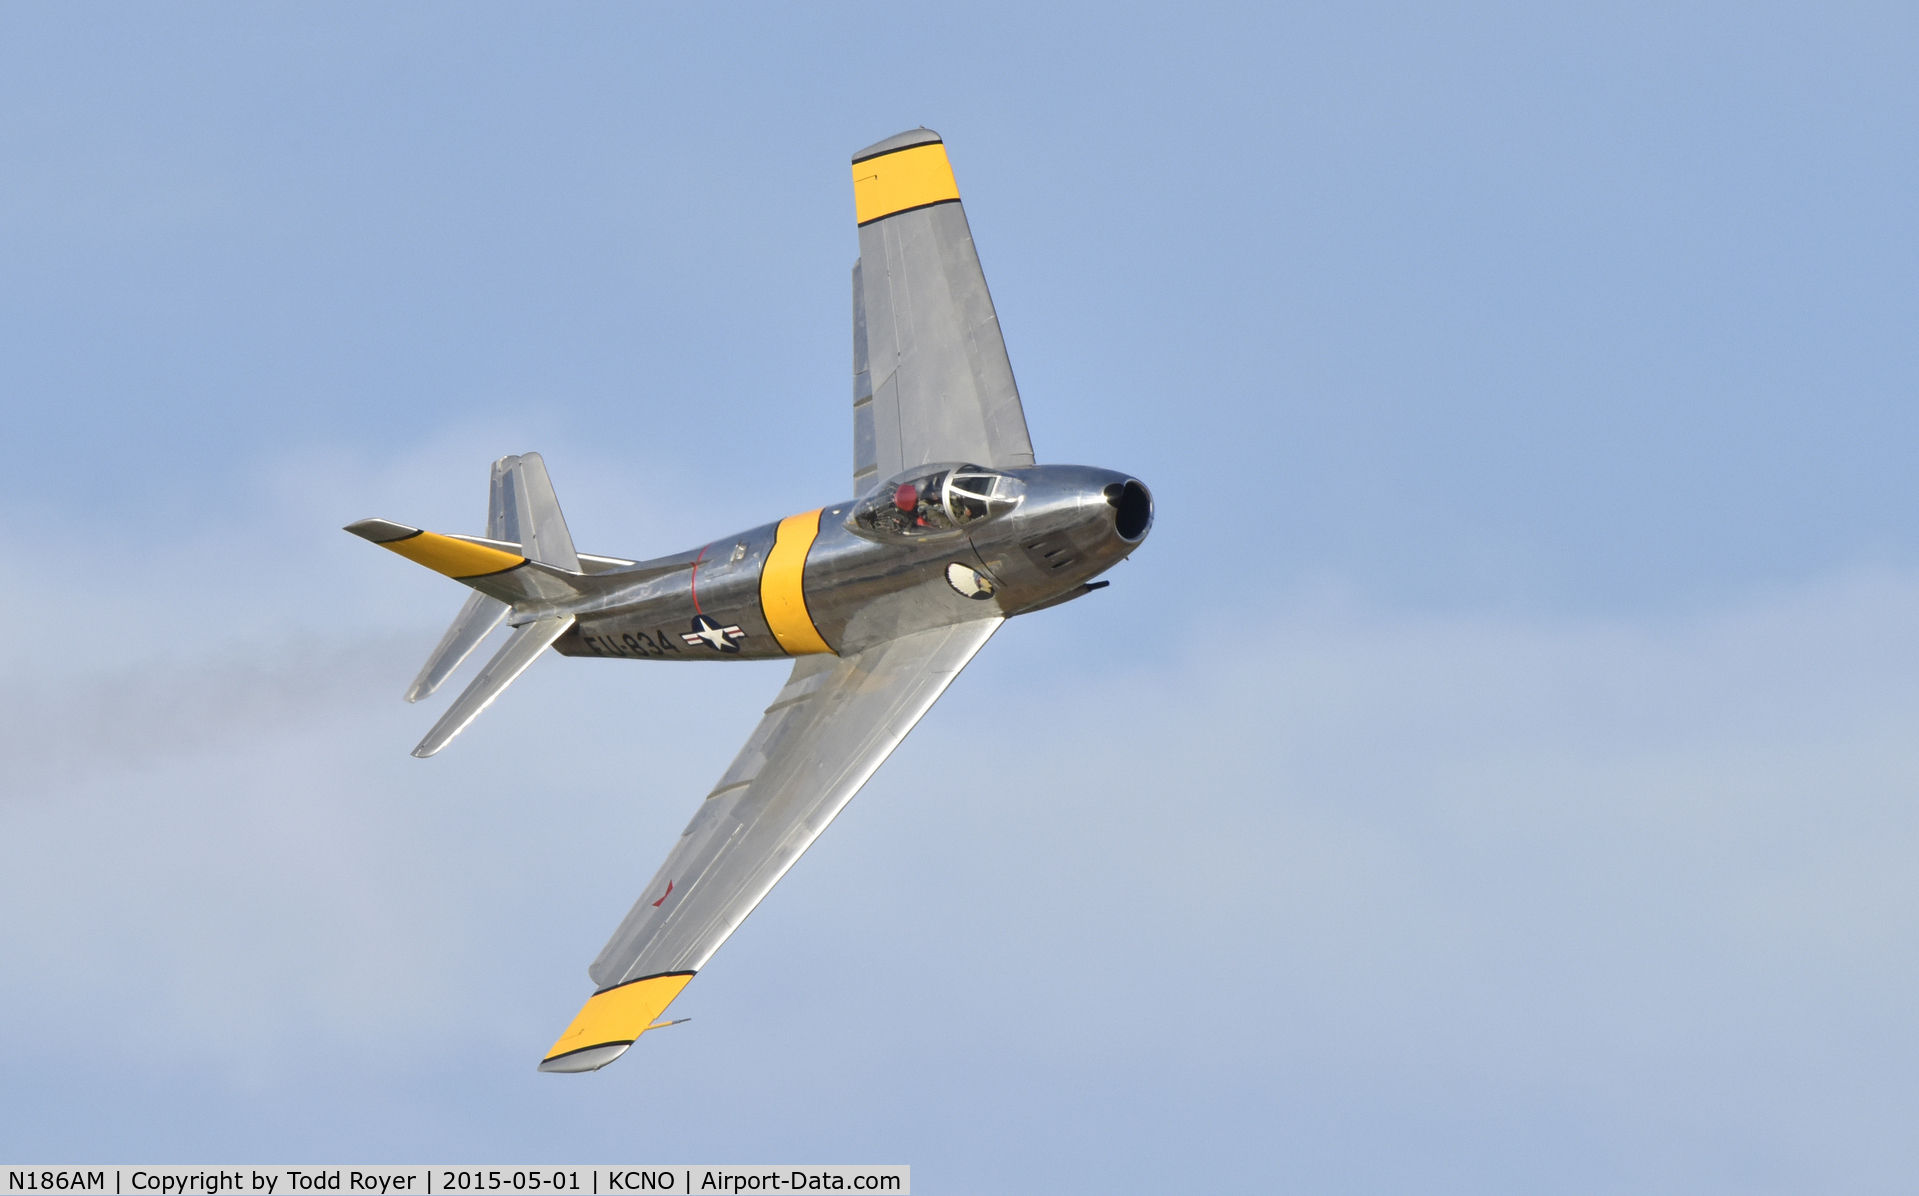 N186AM, 1952 North American F-86F Sabre C/N 191-708, Flying at the 2015 Planes of Fame Airshow, look close this is a formation flight